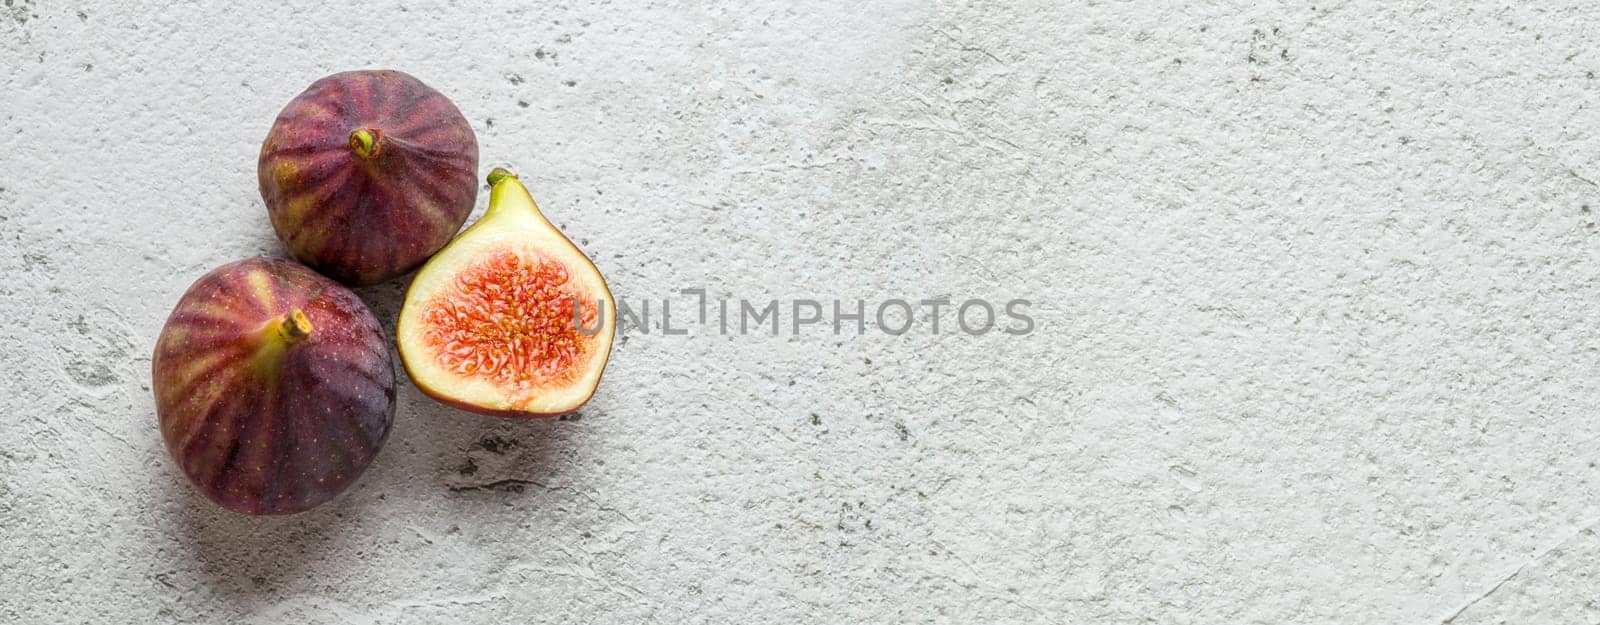 View of whole and cut organic figs on stone table by Sonat